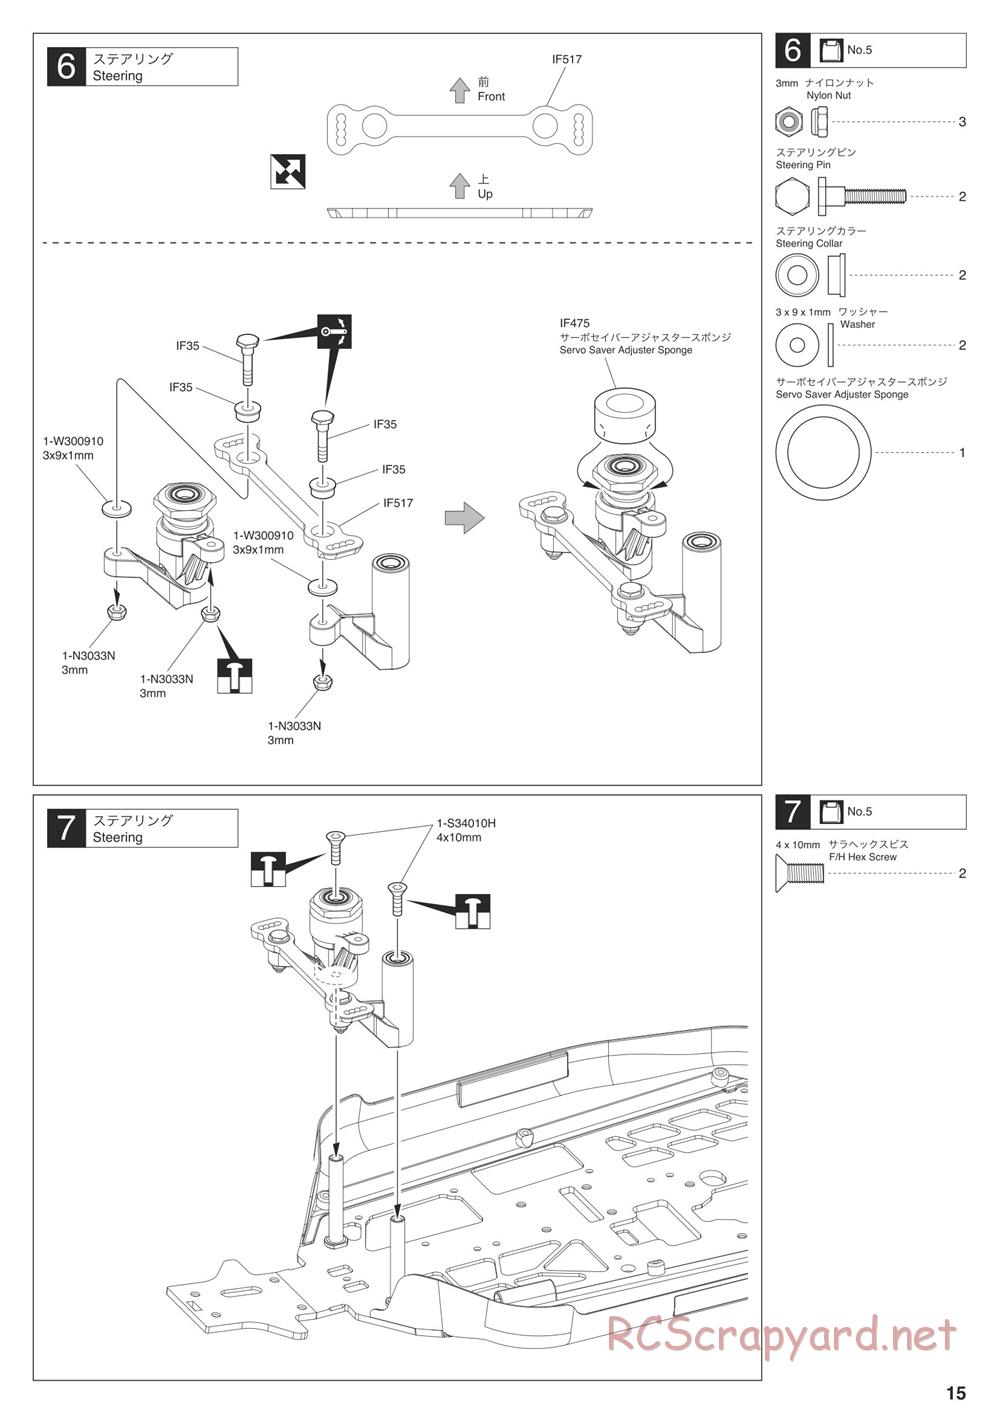 Kyosho - Inferno MP10 - Manual - Page 15